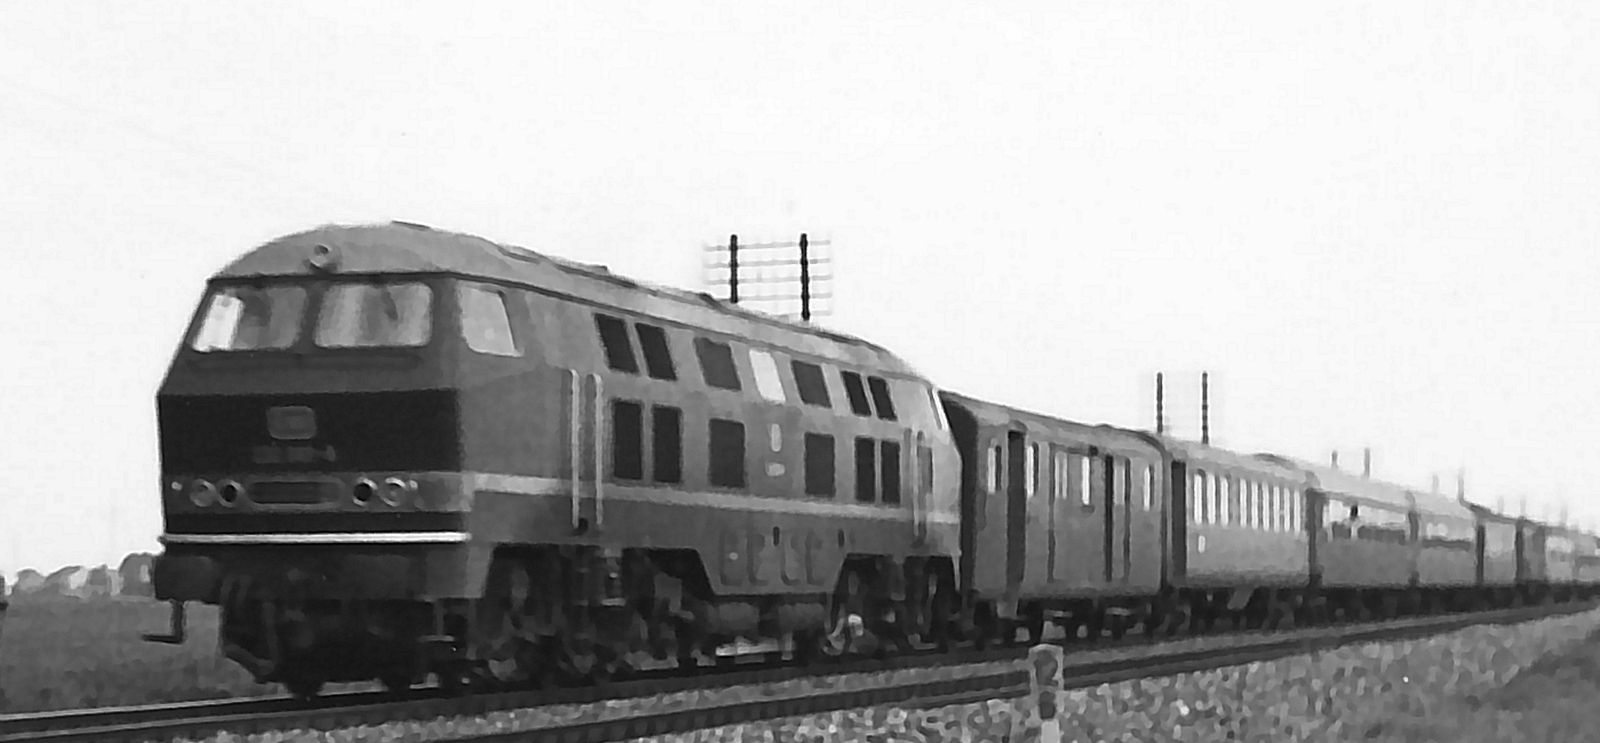 232 001 in 1968 west of Munich-Aubing with an express train